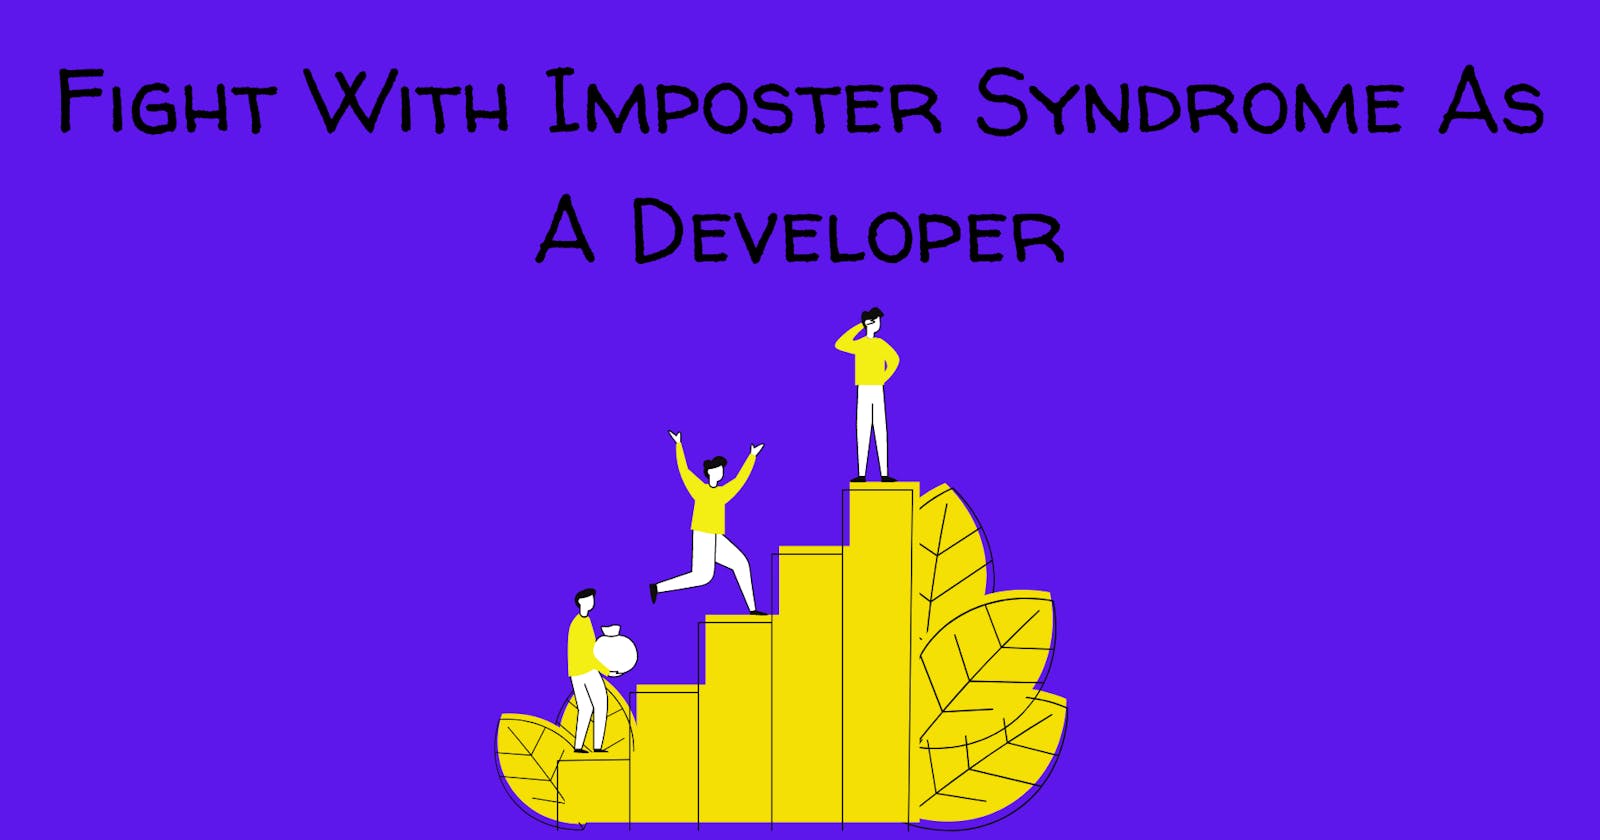 Fight With Imposter Syndrome As A Developer